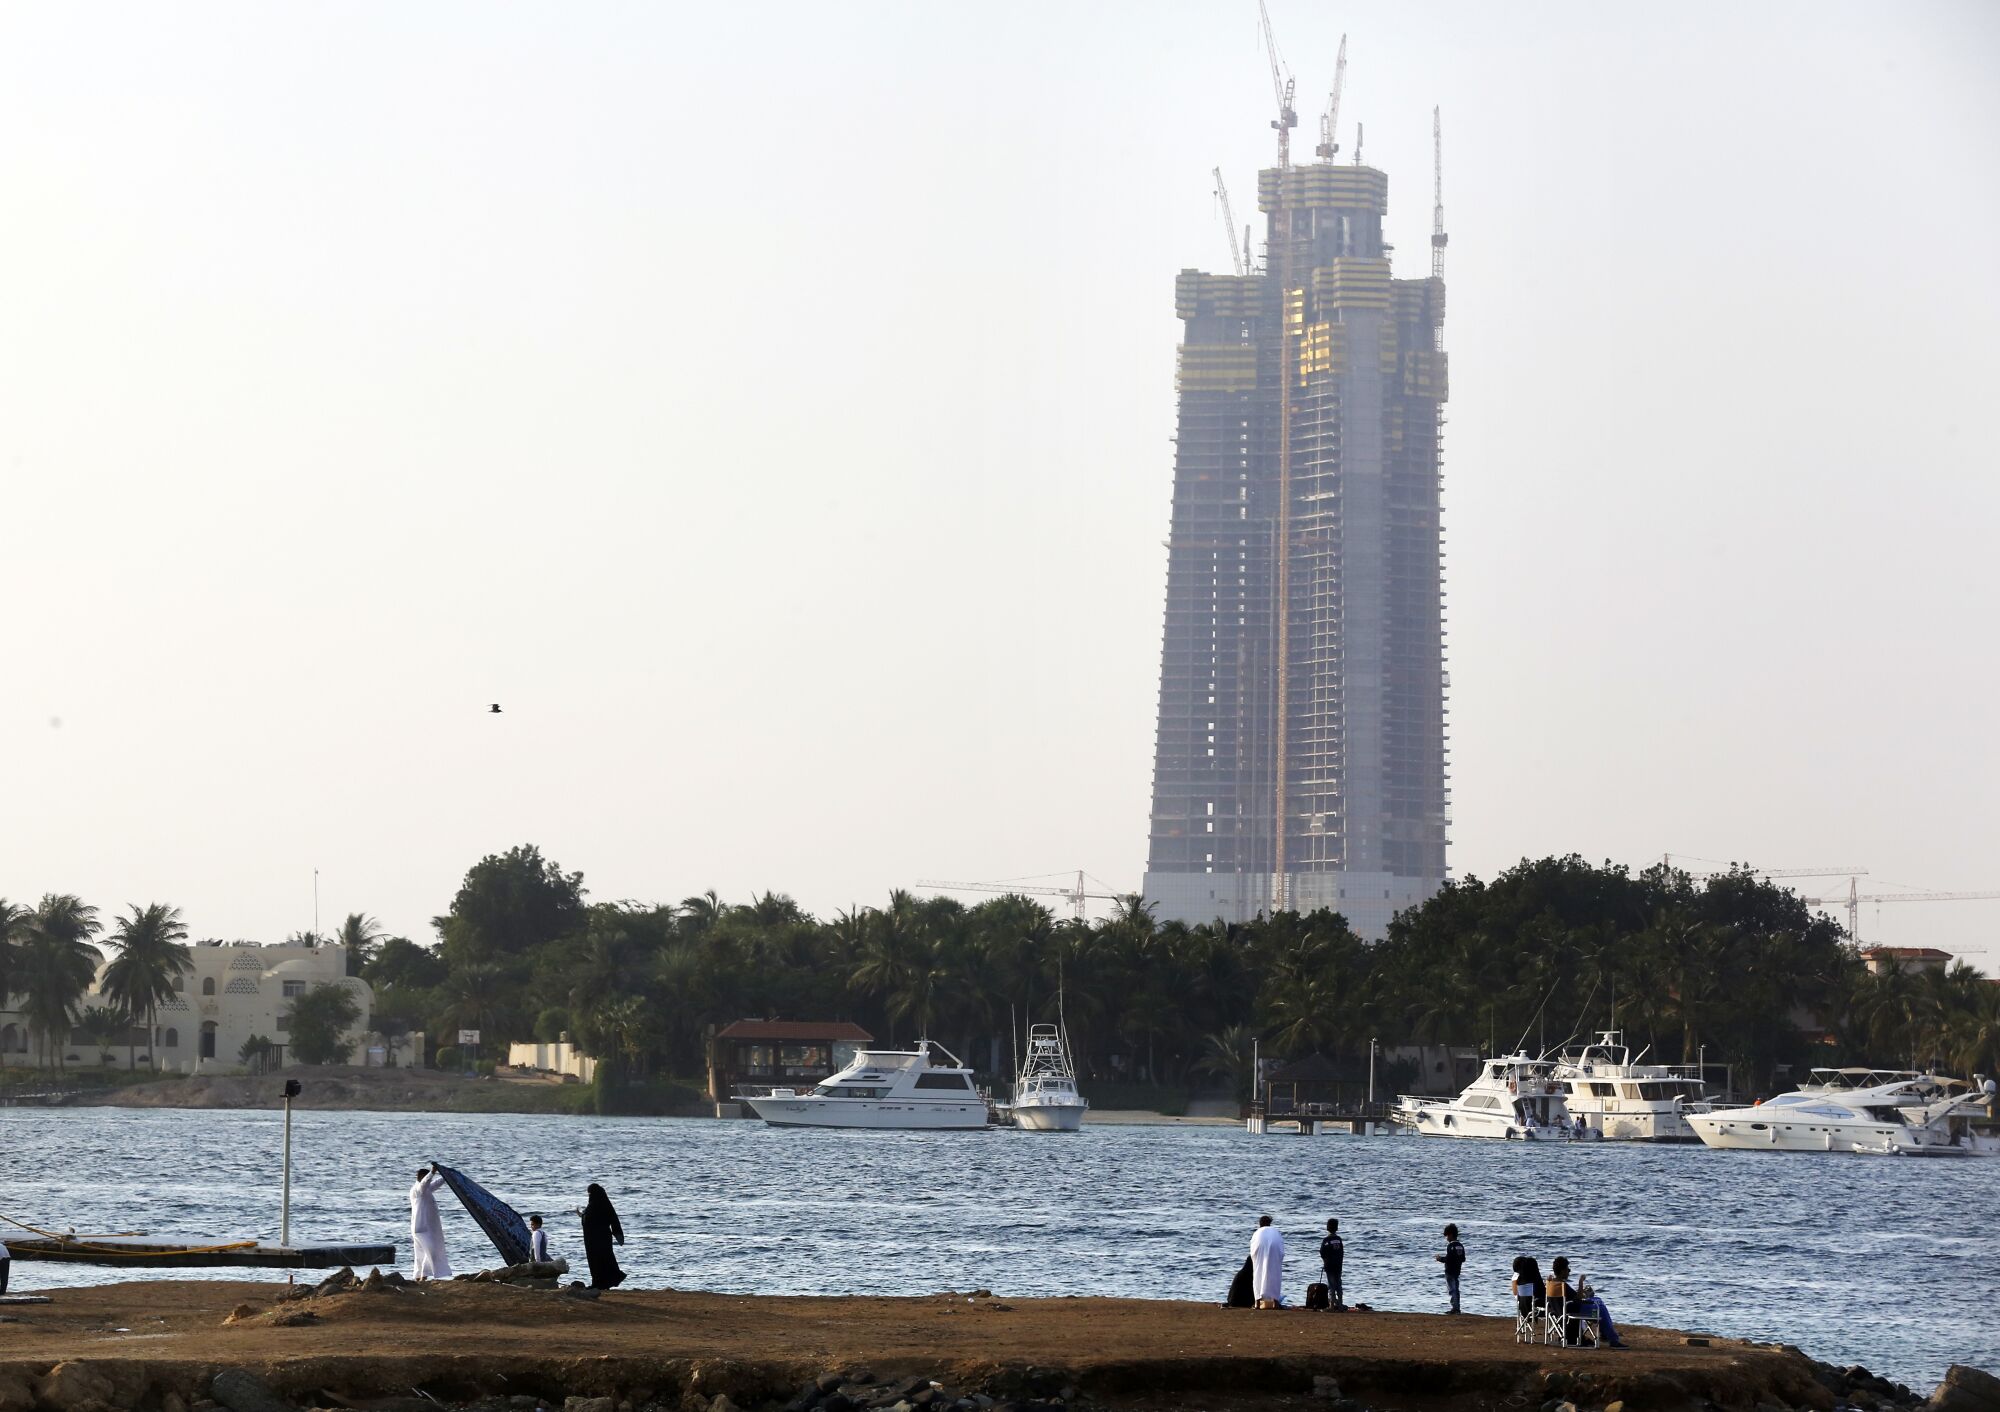 The unfinished Jeddah Tower skyscraper in the distance